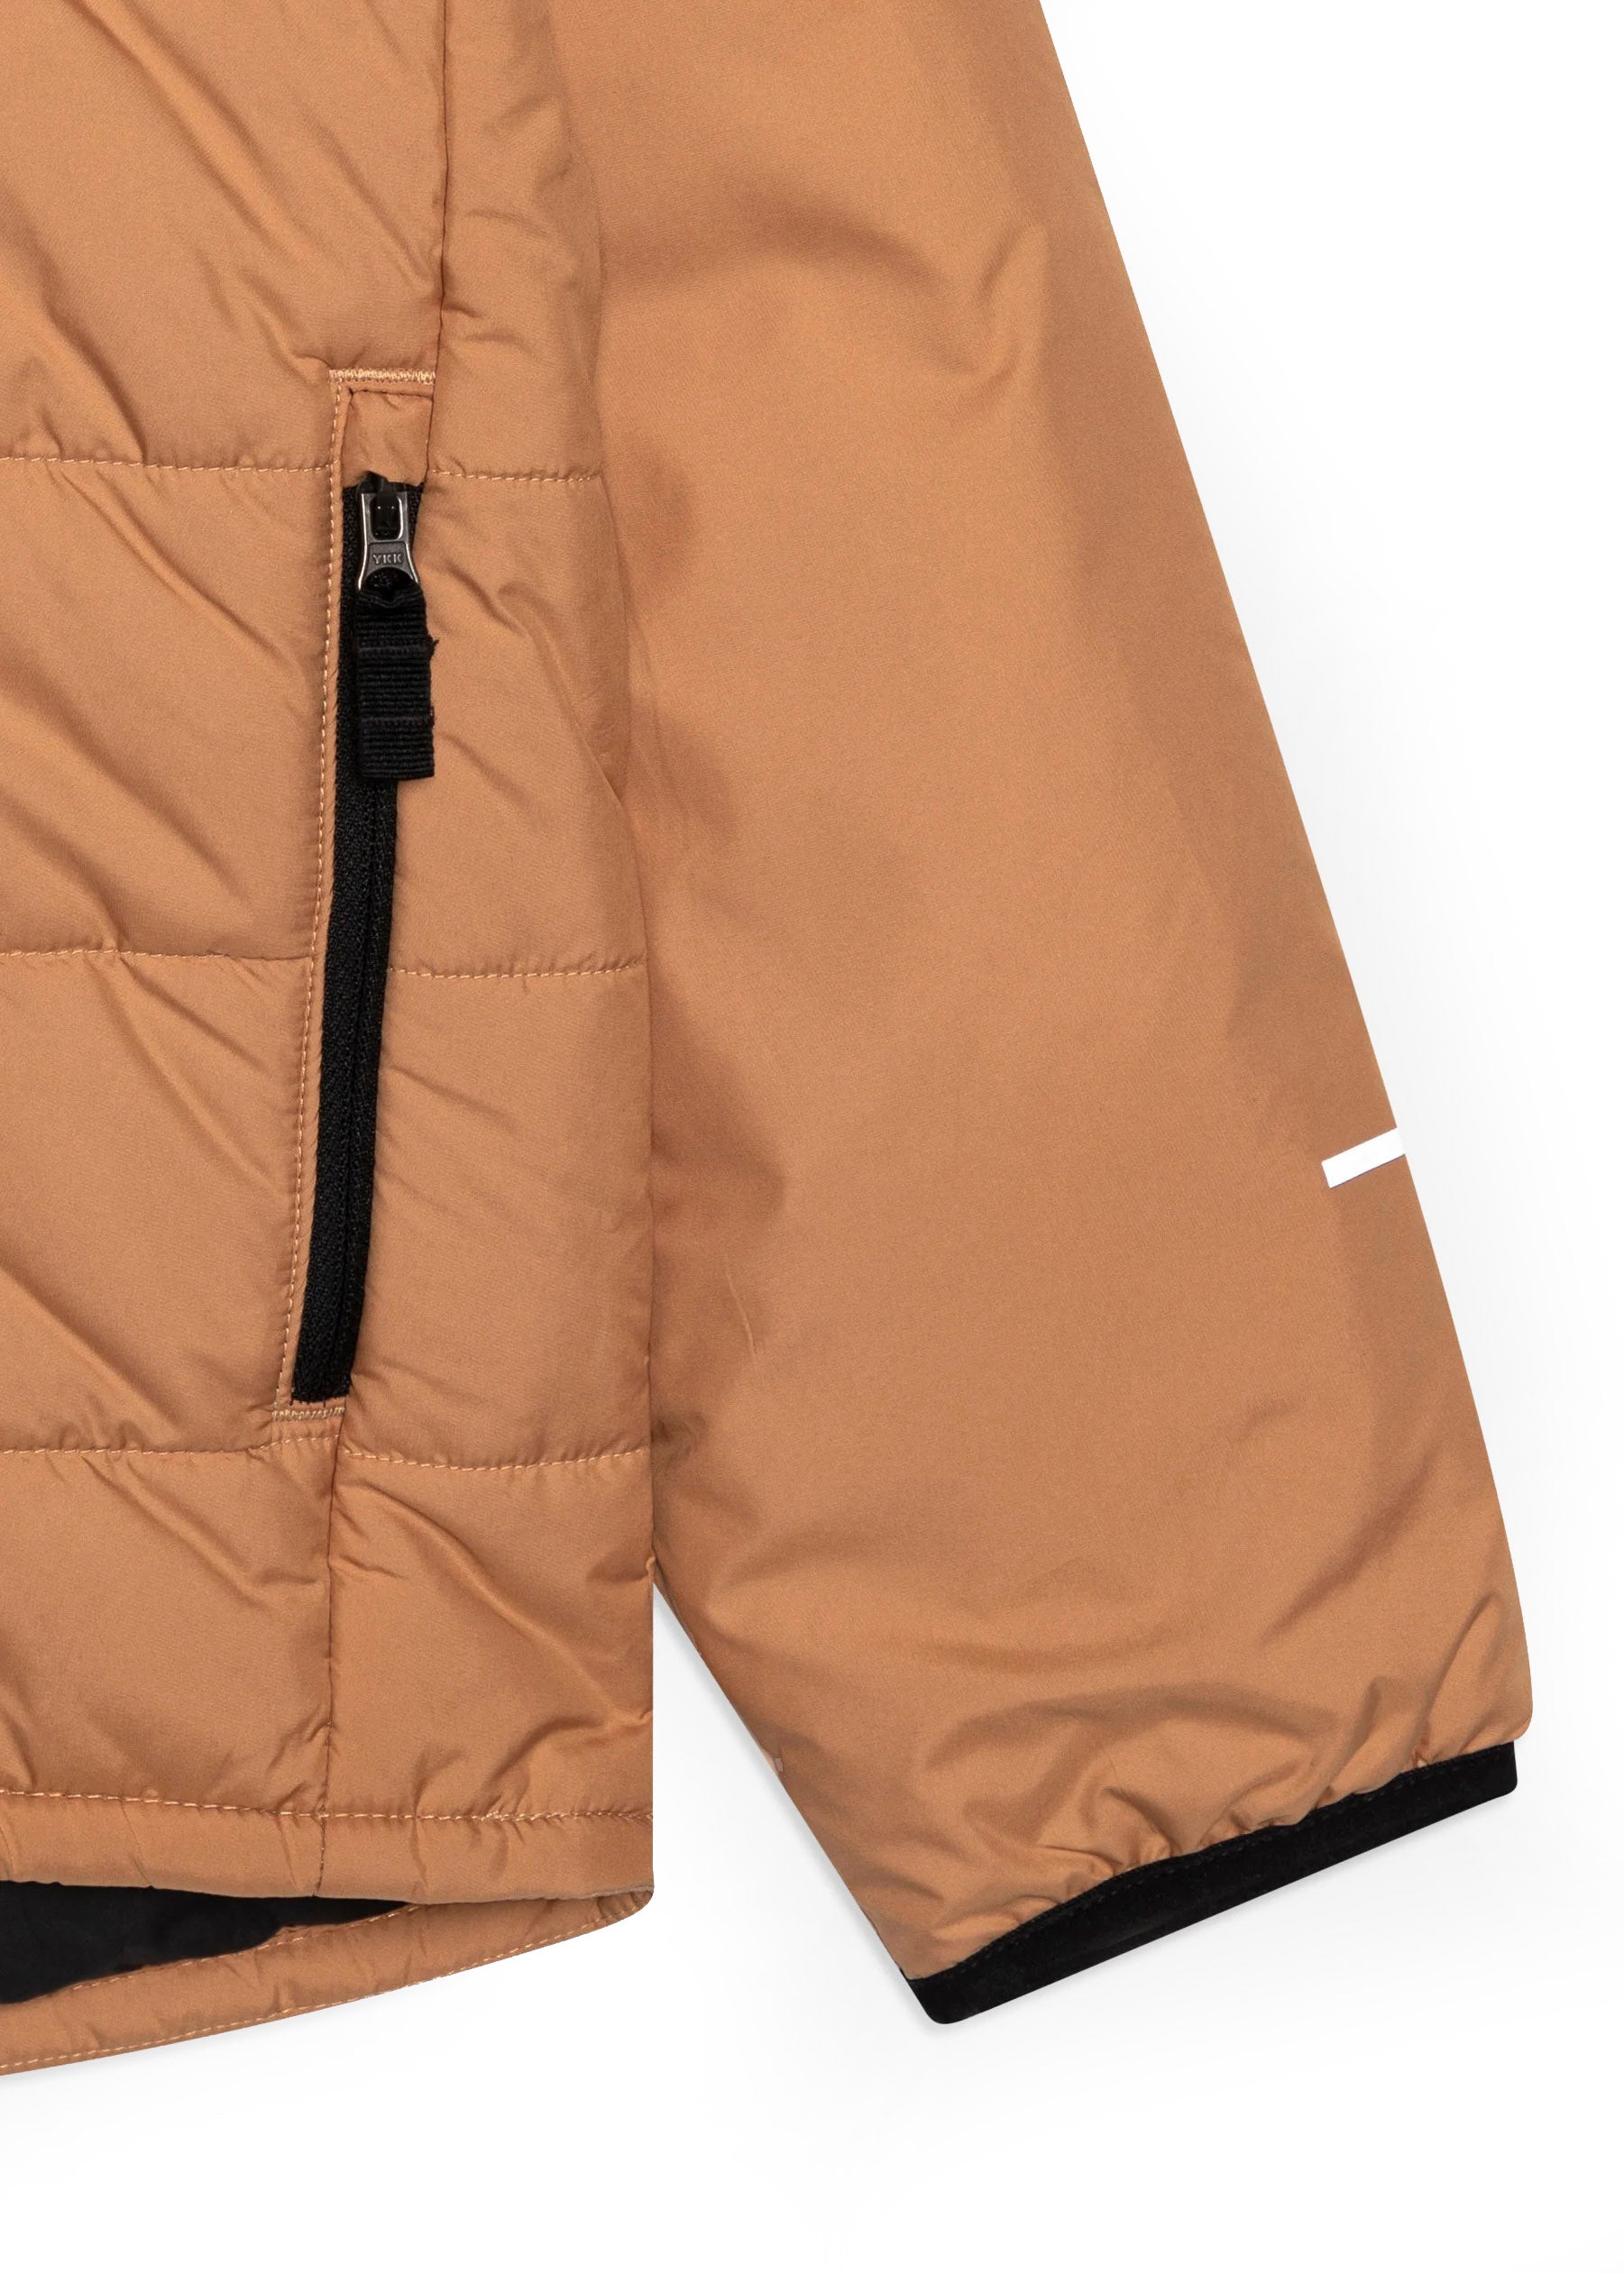 Giacca The North Face Kids Piumino "Never Stop" Color Nocciola - Florence Kids